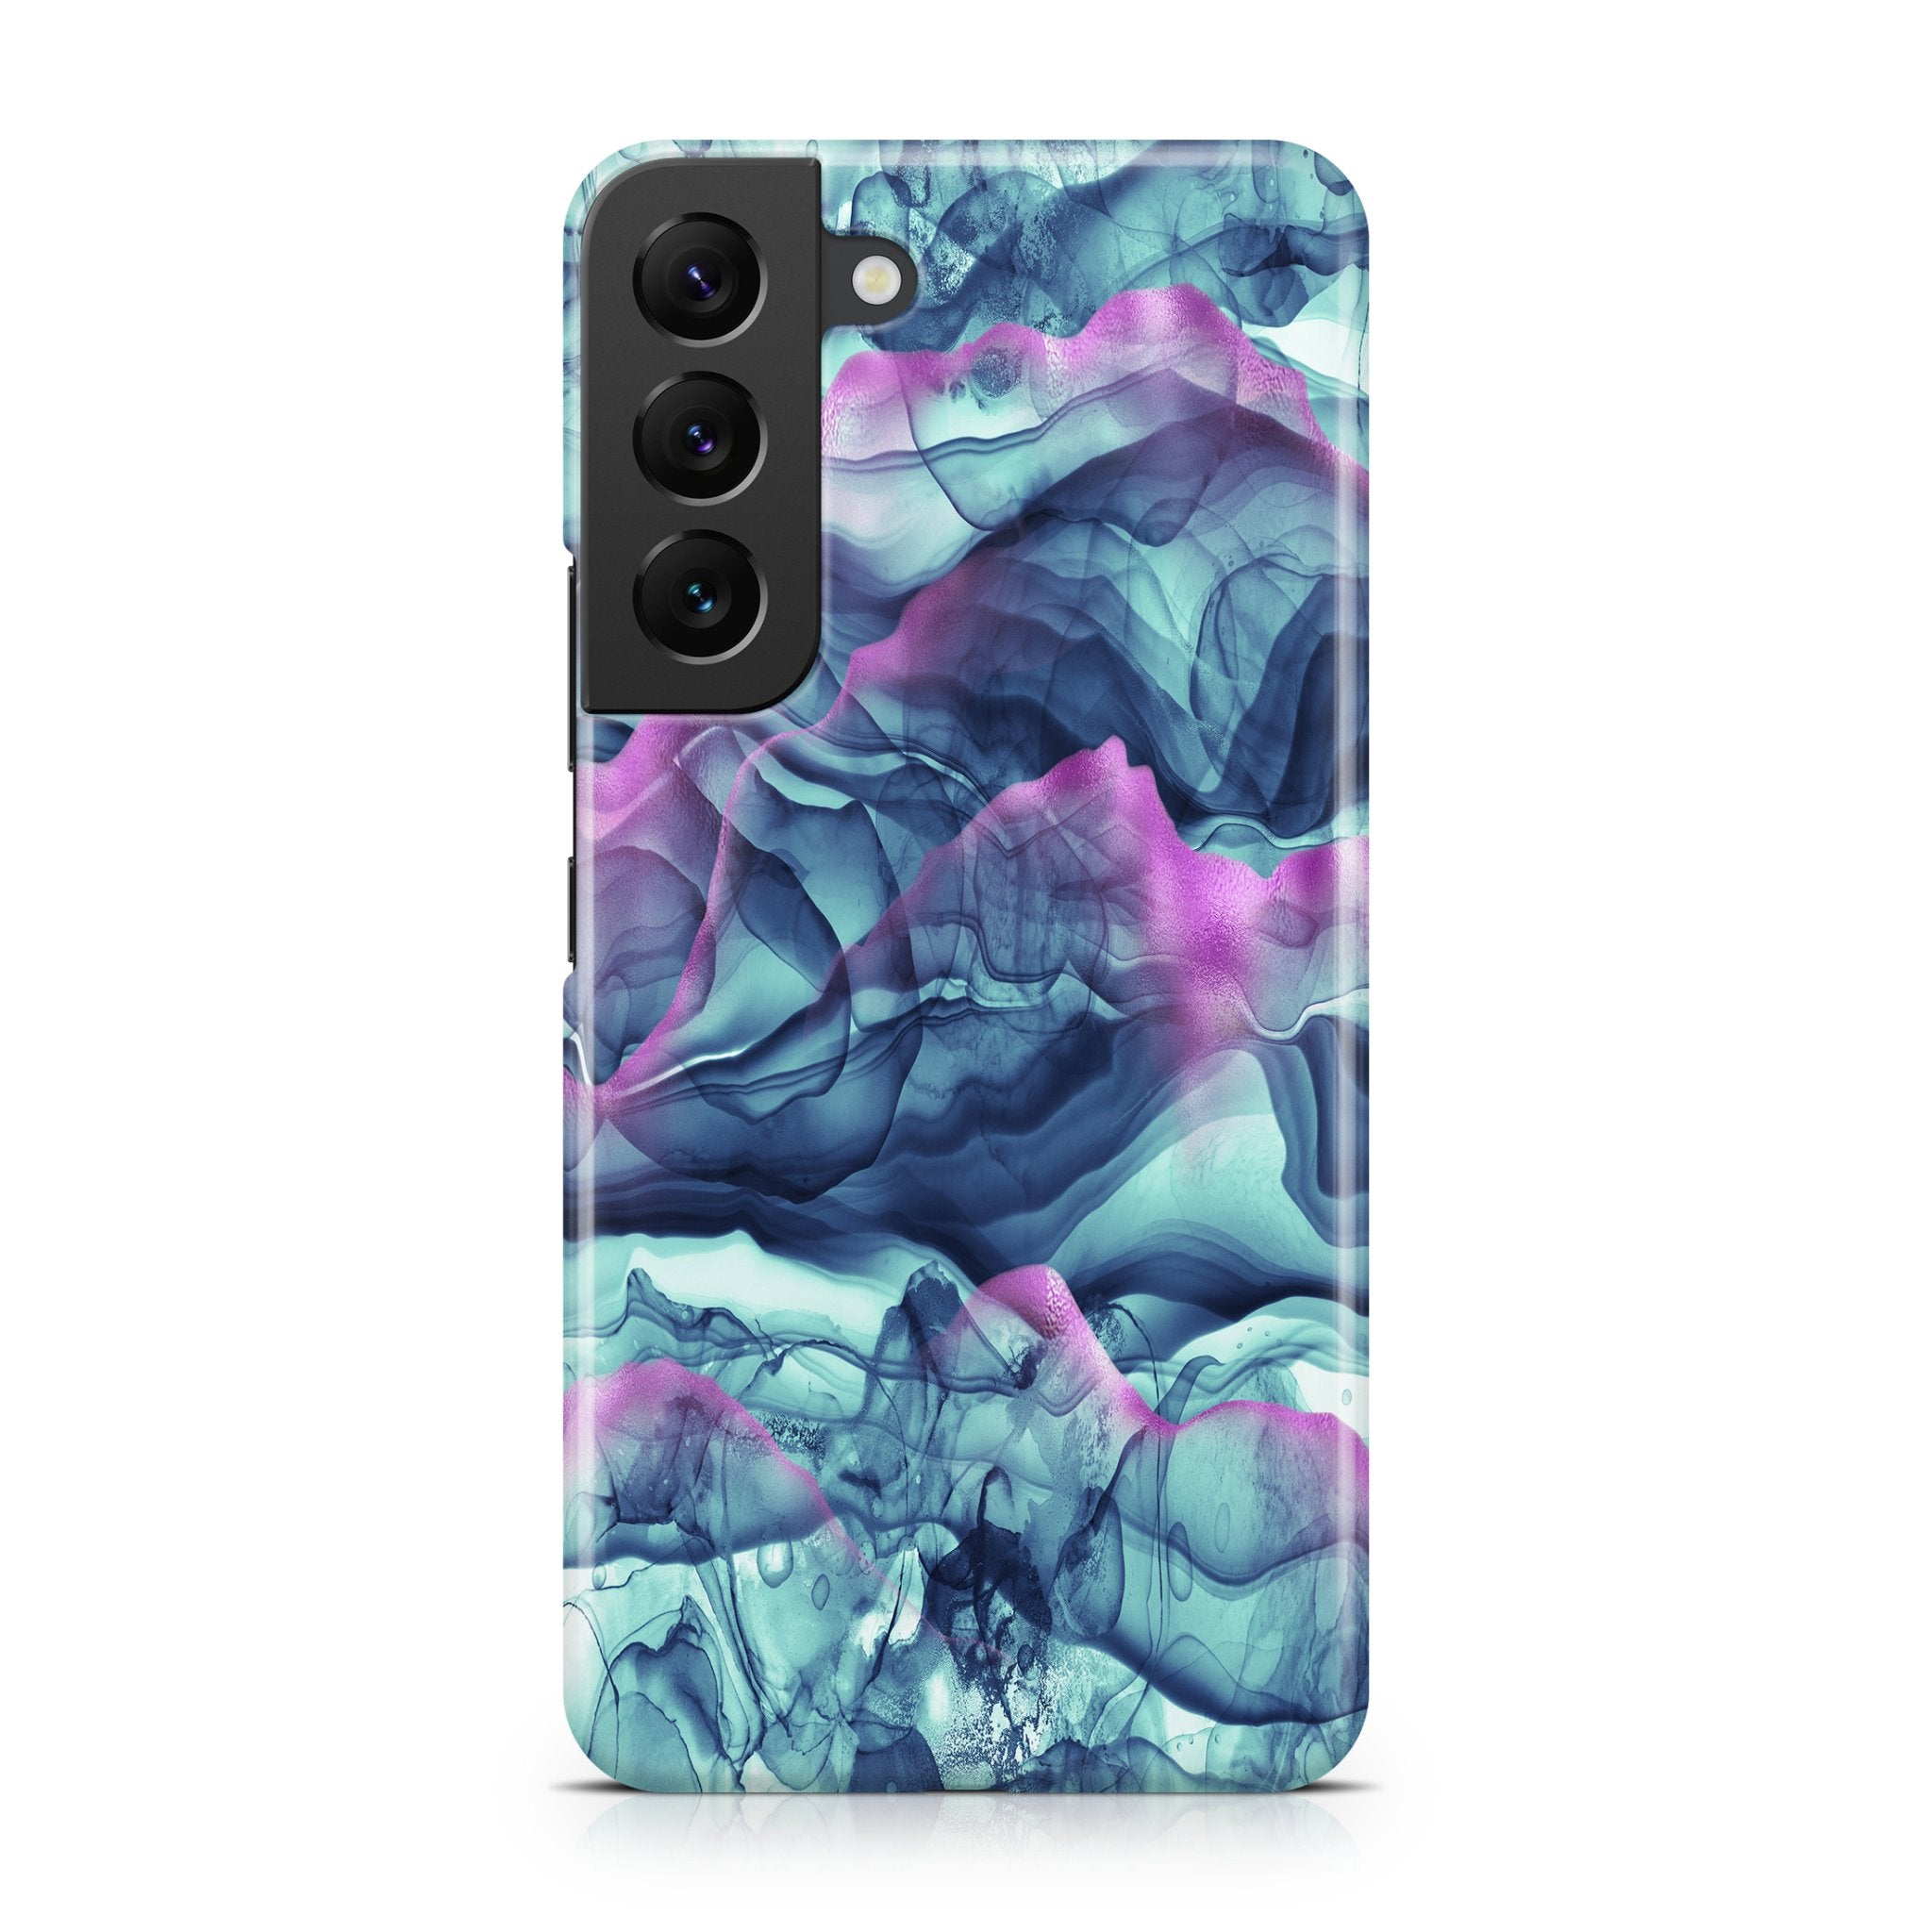 Teal Wisps - Samsung phone case designs by CaseSwagger